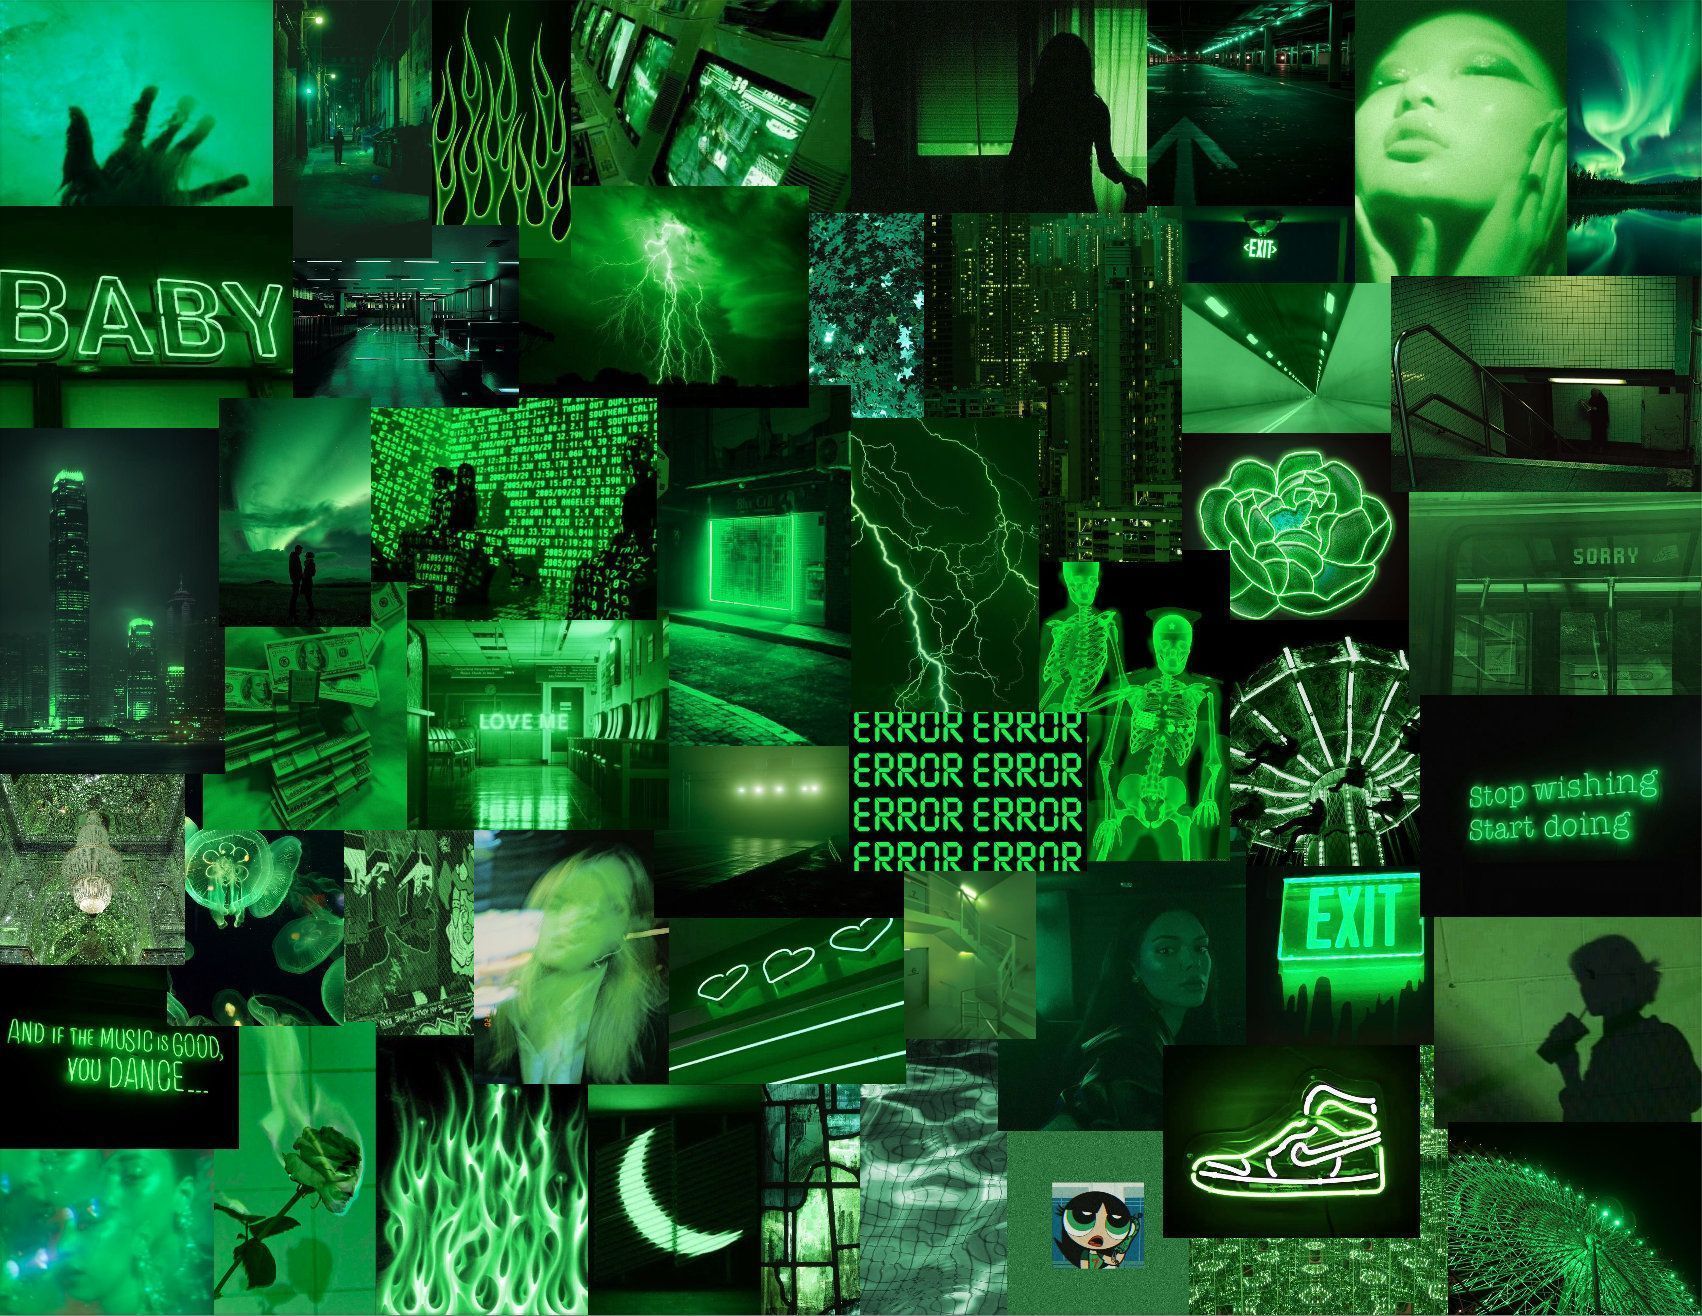 A collage of pictures with green lighting - Lime green, neon green